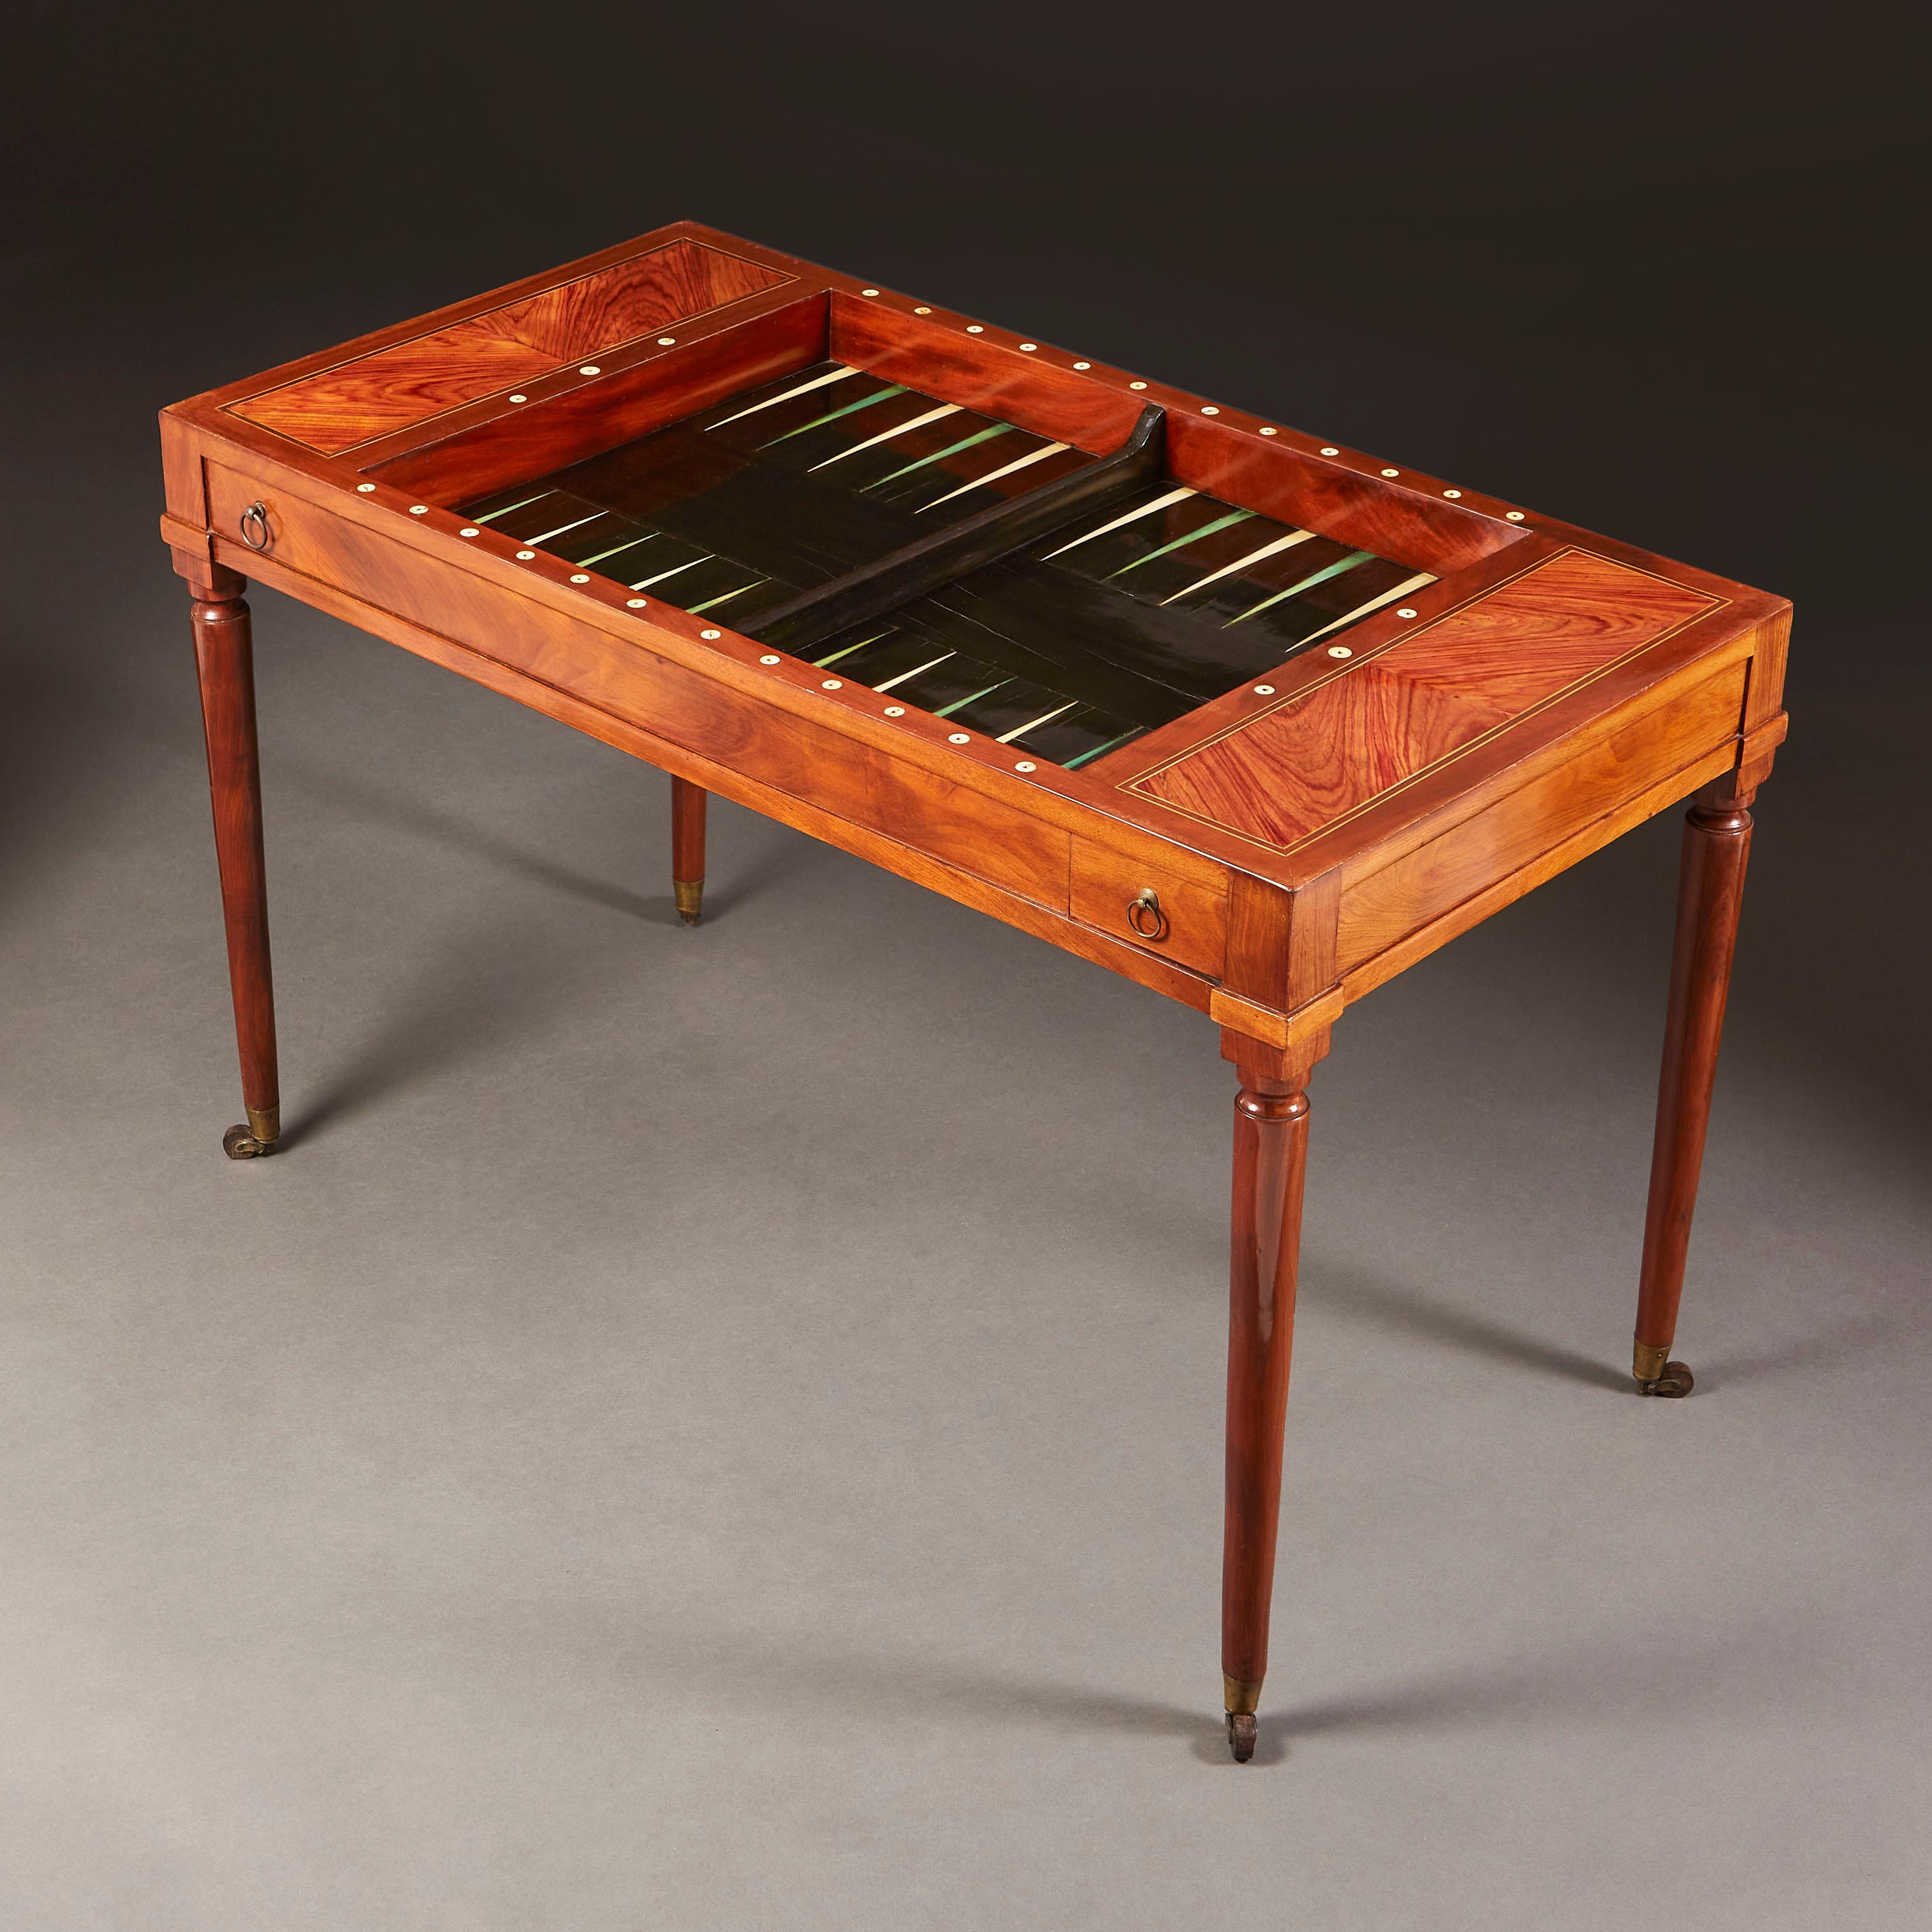 An early nineteenth century kingwood backgammon table with detachable top and ebonised playing surface, stained triangular lozenges, all supported on cylindrical legs, terminating in topie castors.